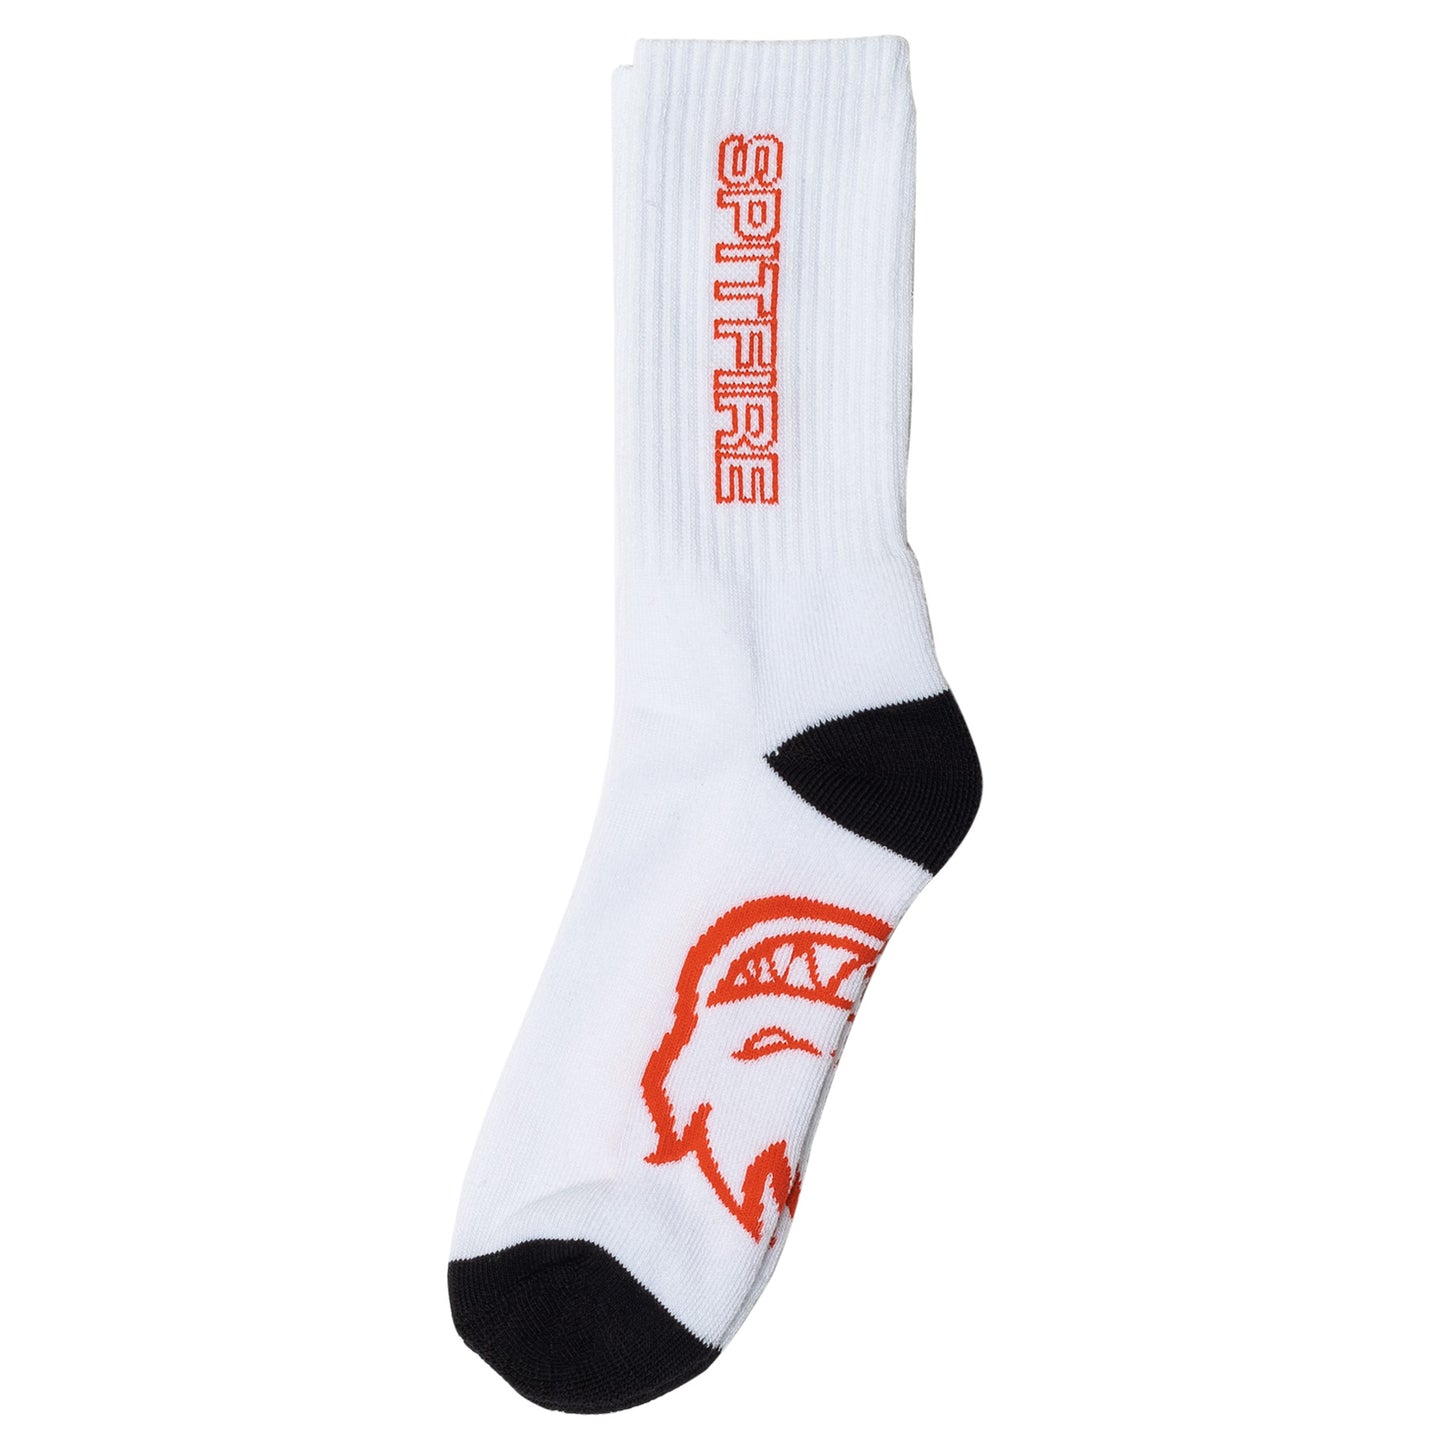 SPITFIRE - CLASSIC 87 3PACK SOCK - WHITE/BLACK/RED